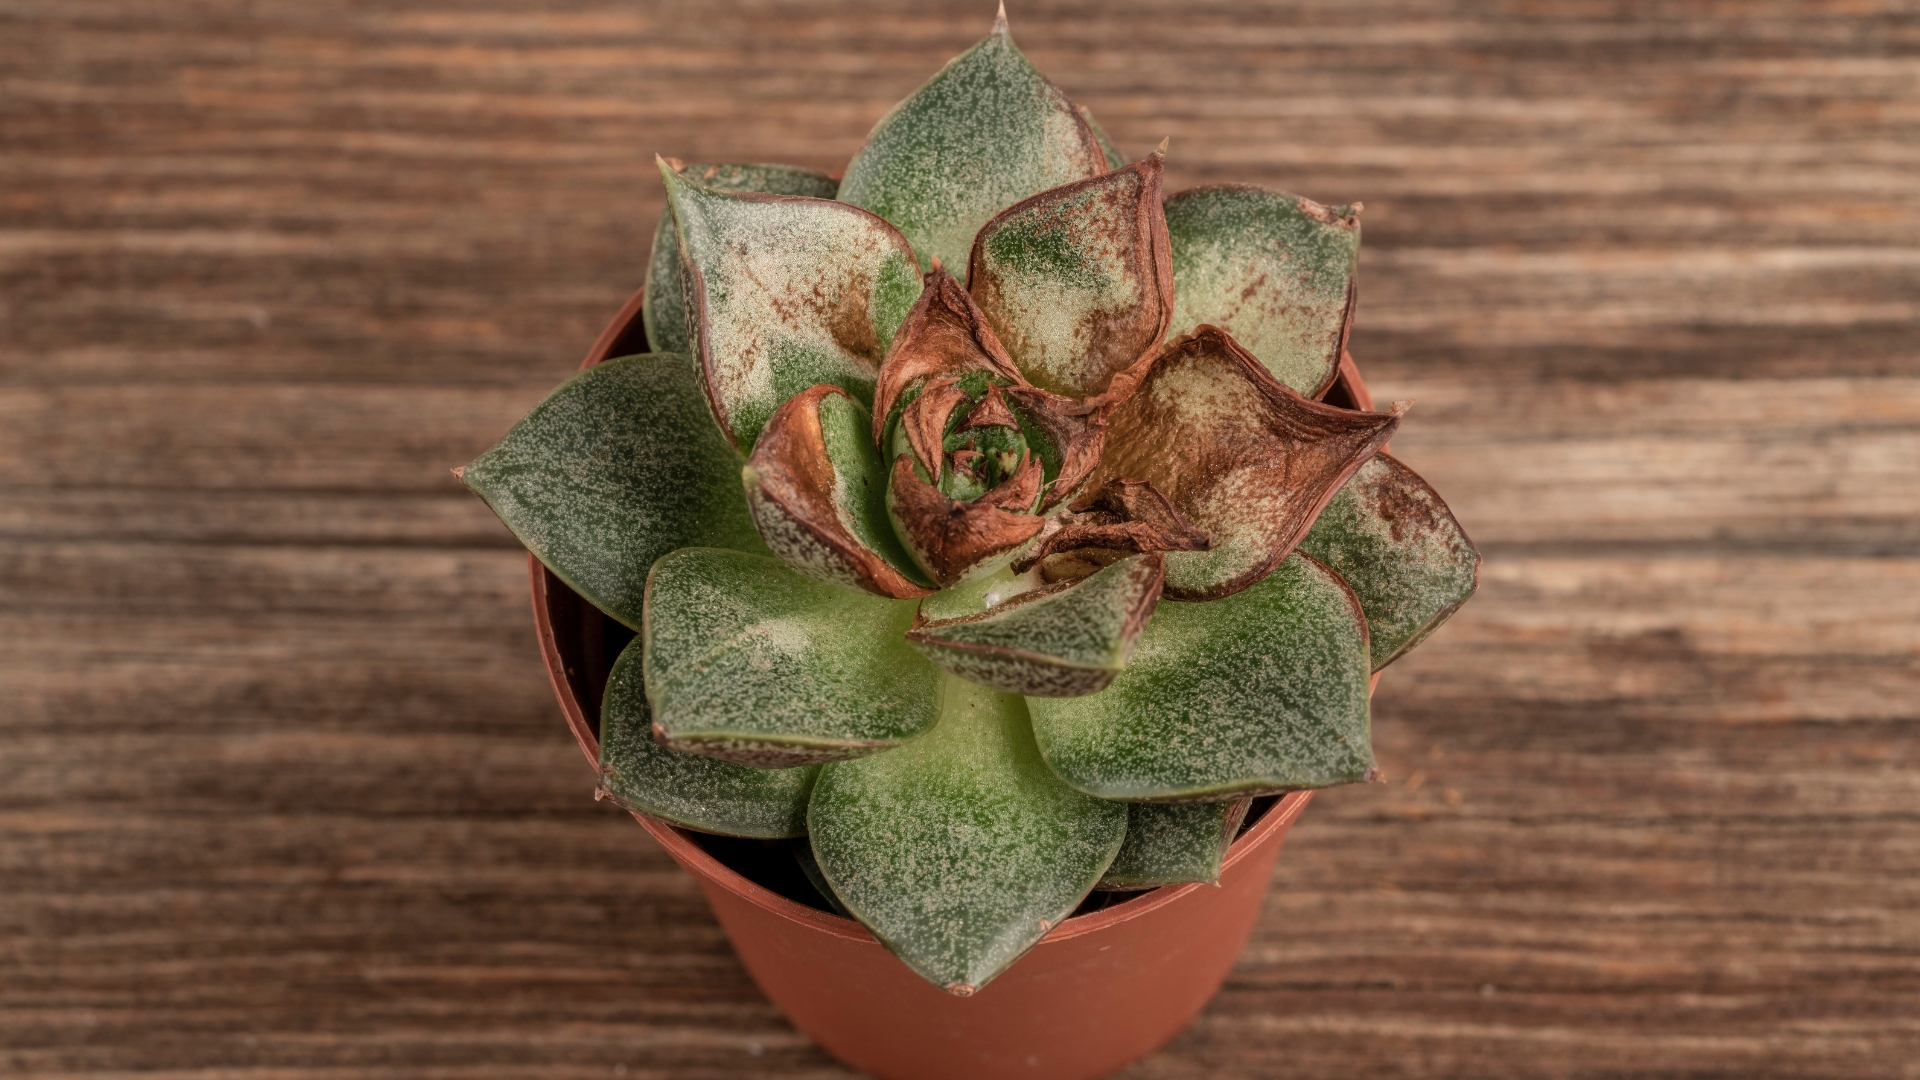 5 Mistakes That Could Ruin Your Succulents